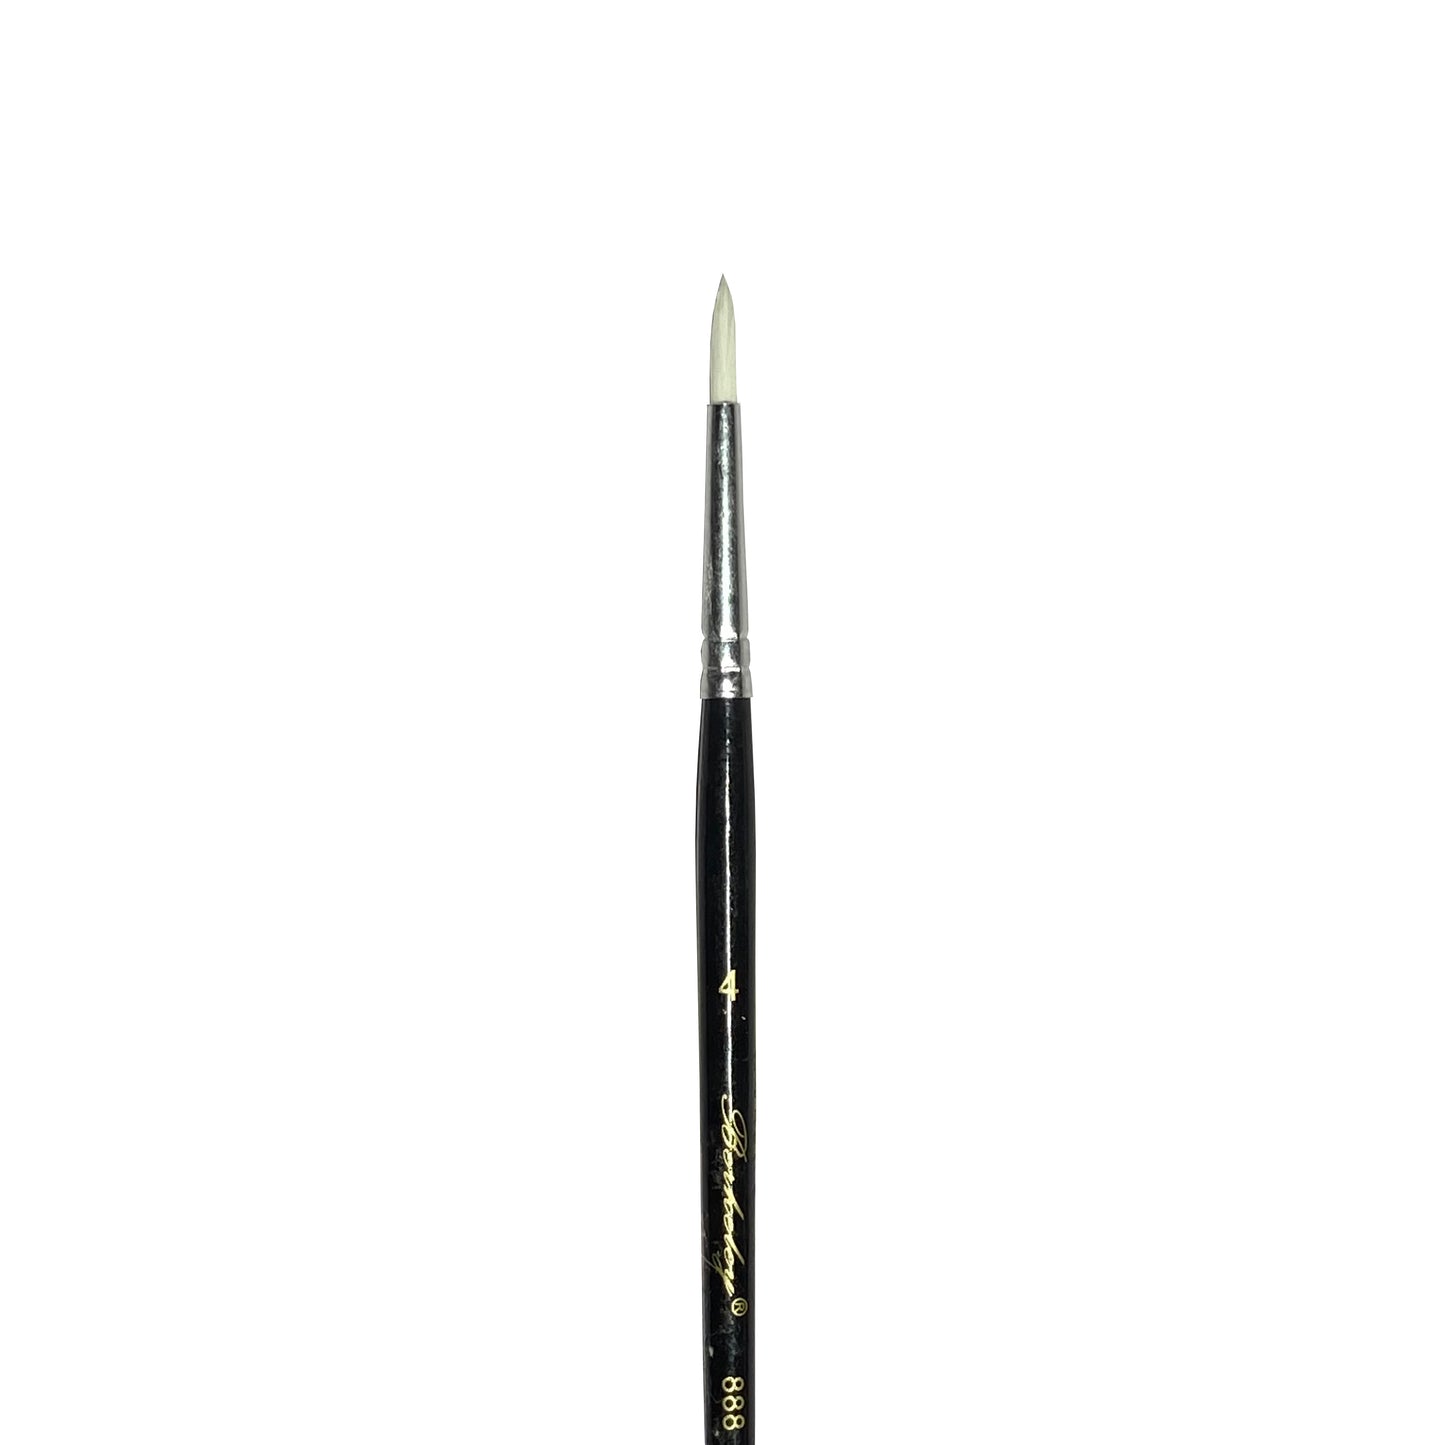 Berkeley Brush 888 is a round brush, commonly used for oil and acrylic paint. 